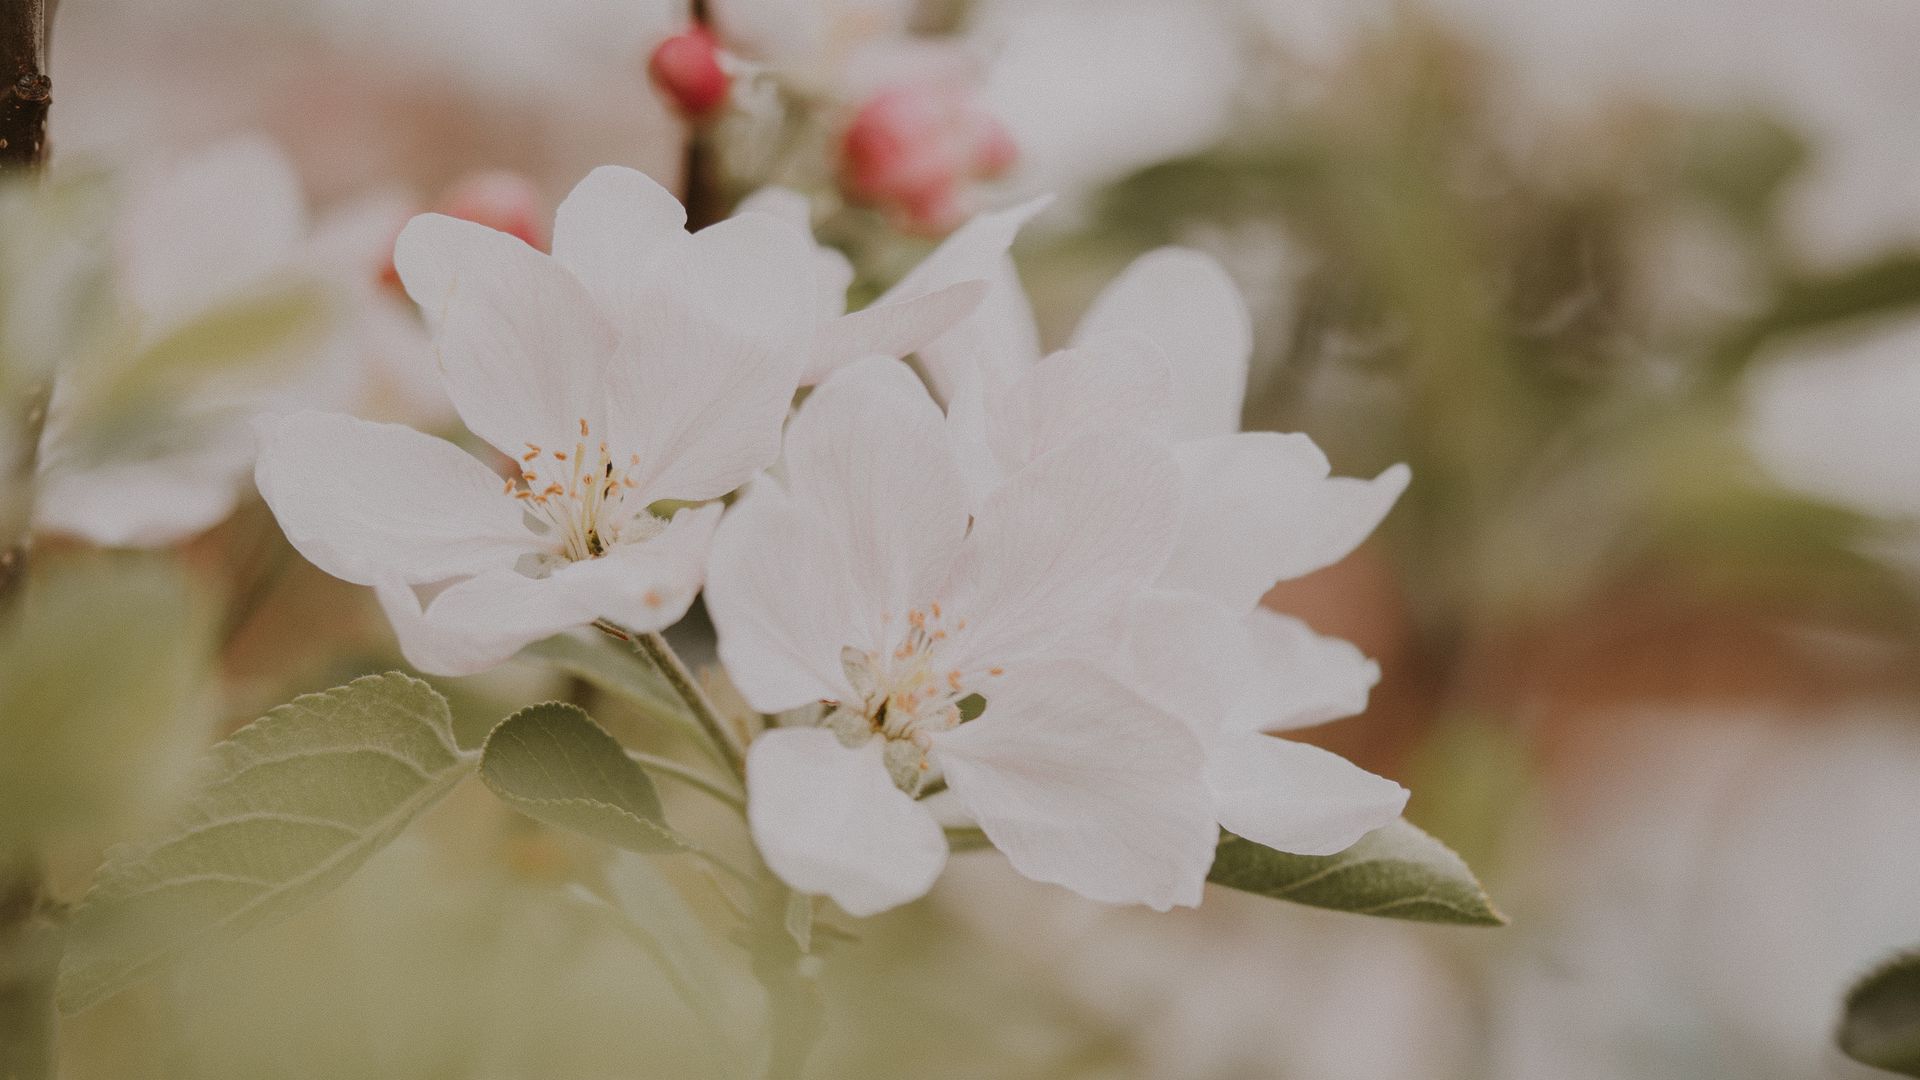 Download wallpaper 1920x1080 flowers, apple, branches, leaves, bloom ...